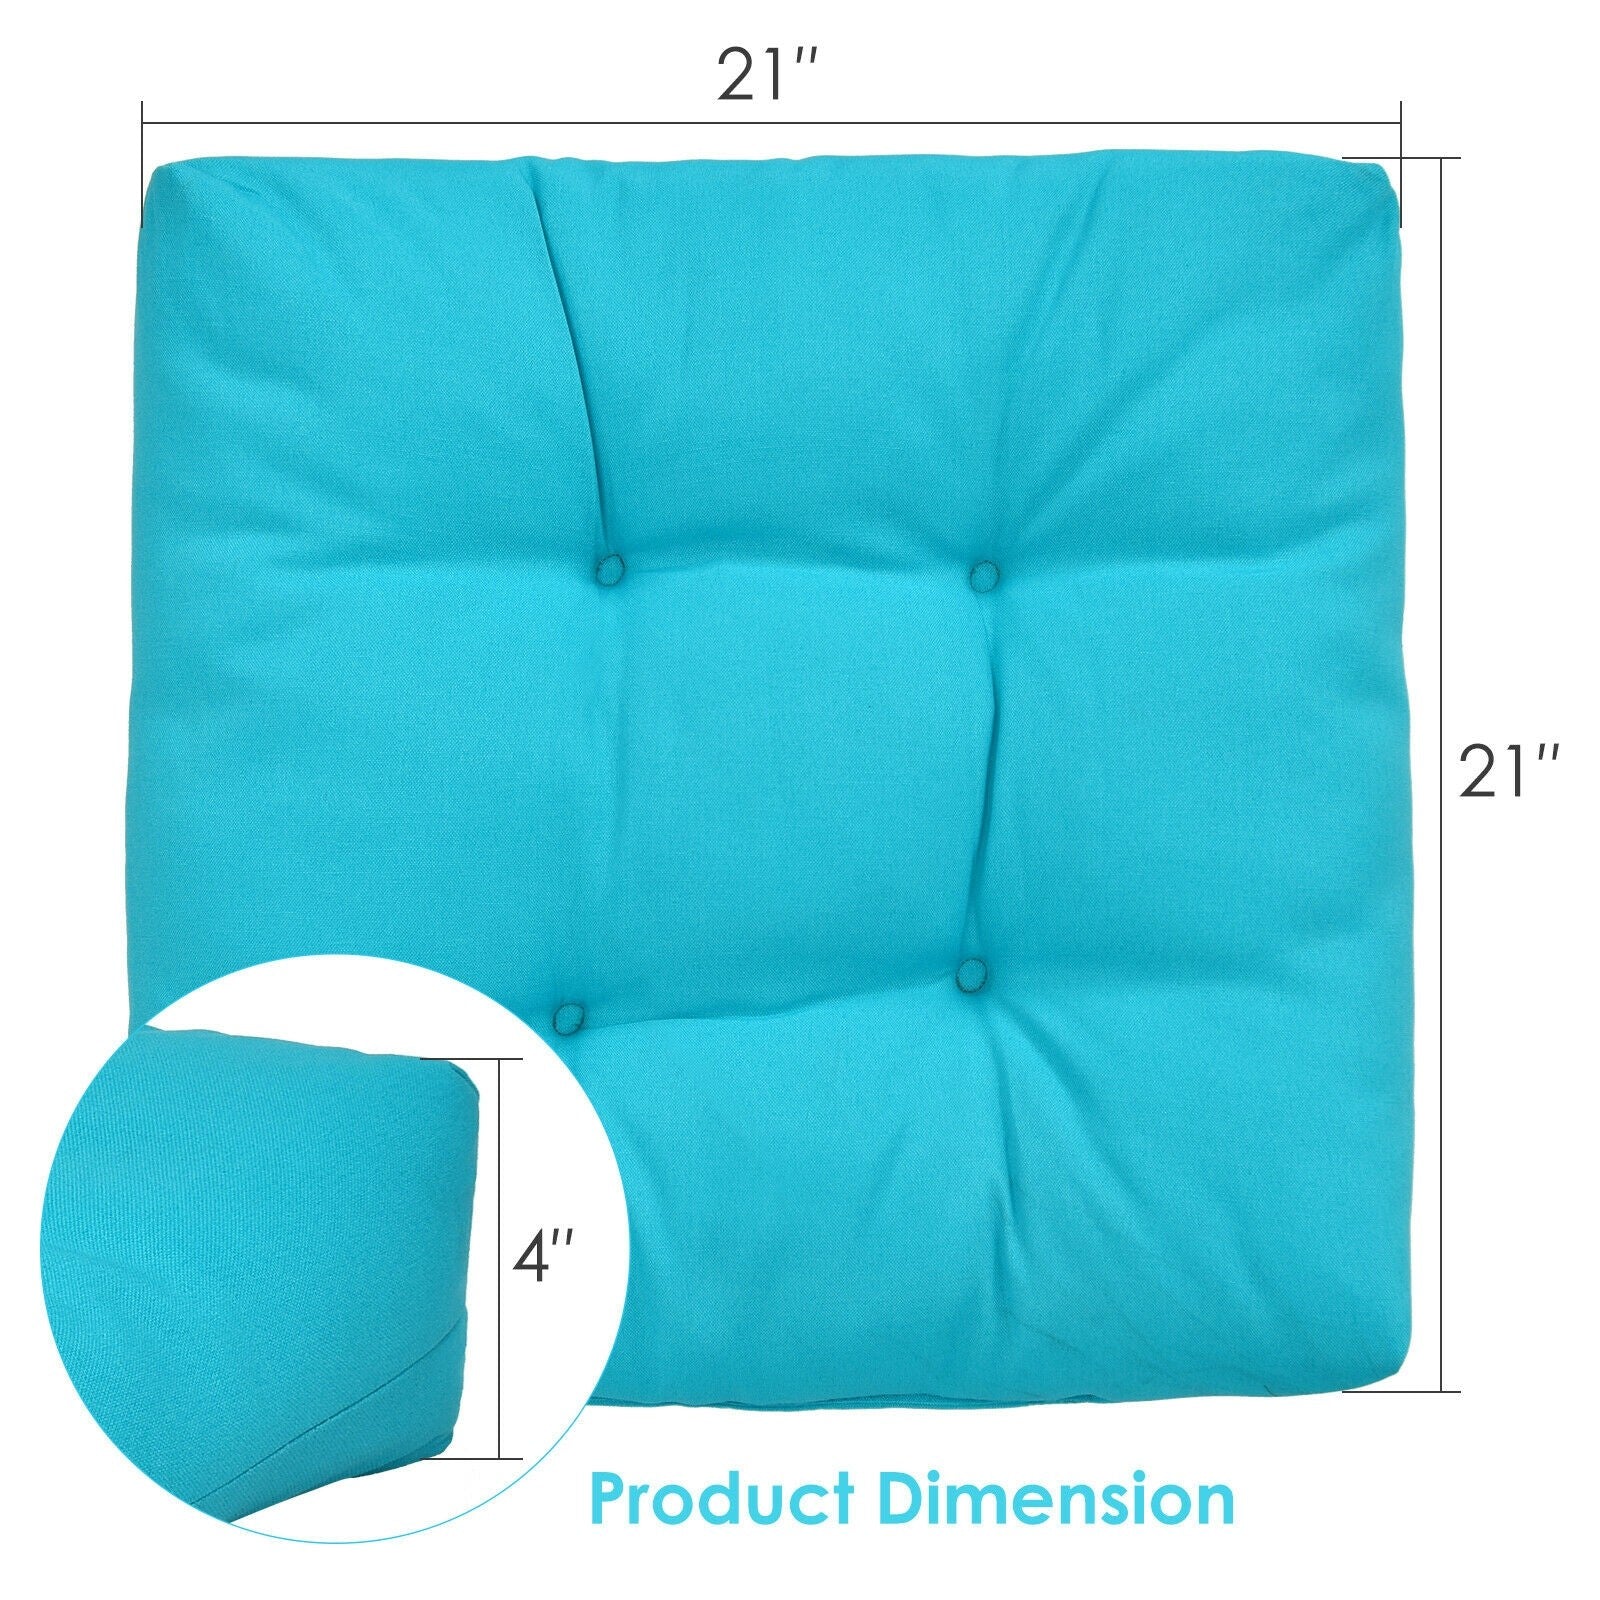 Giantex 2 Pack Tufted Patio Cushions, 4 Inch Thick Outdoor Chair Pads